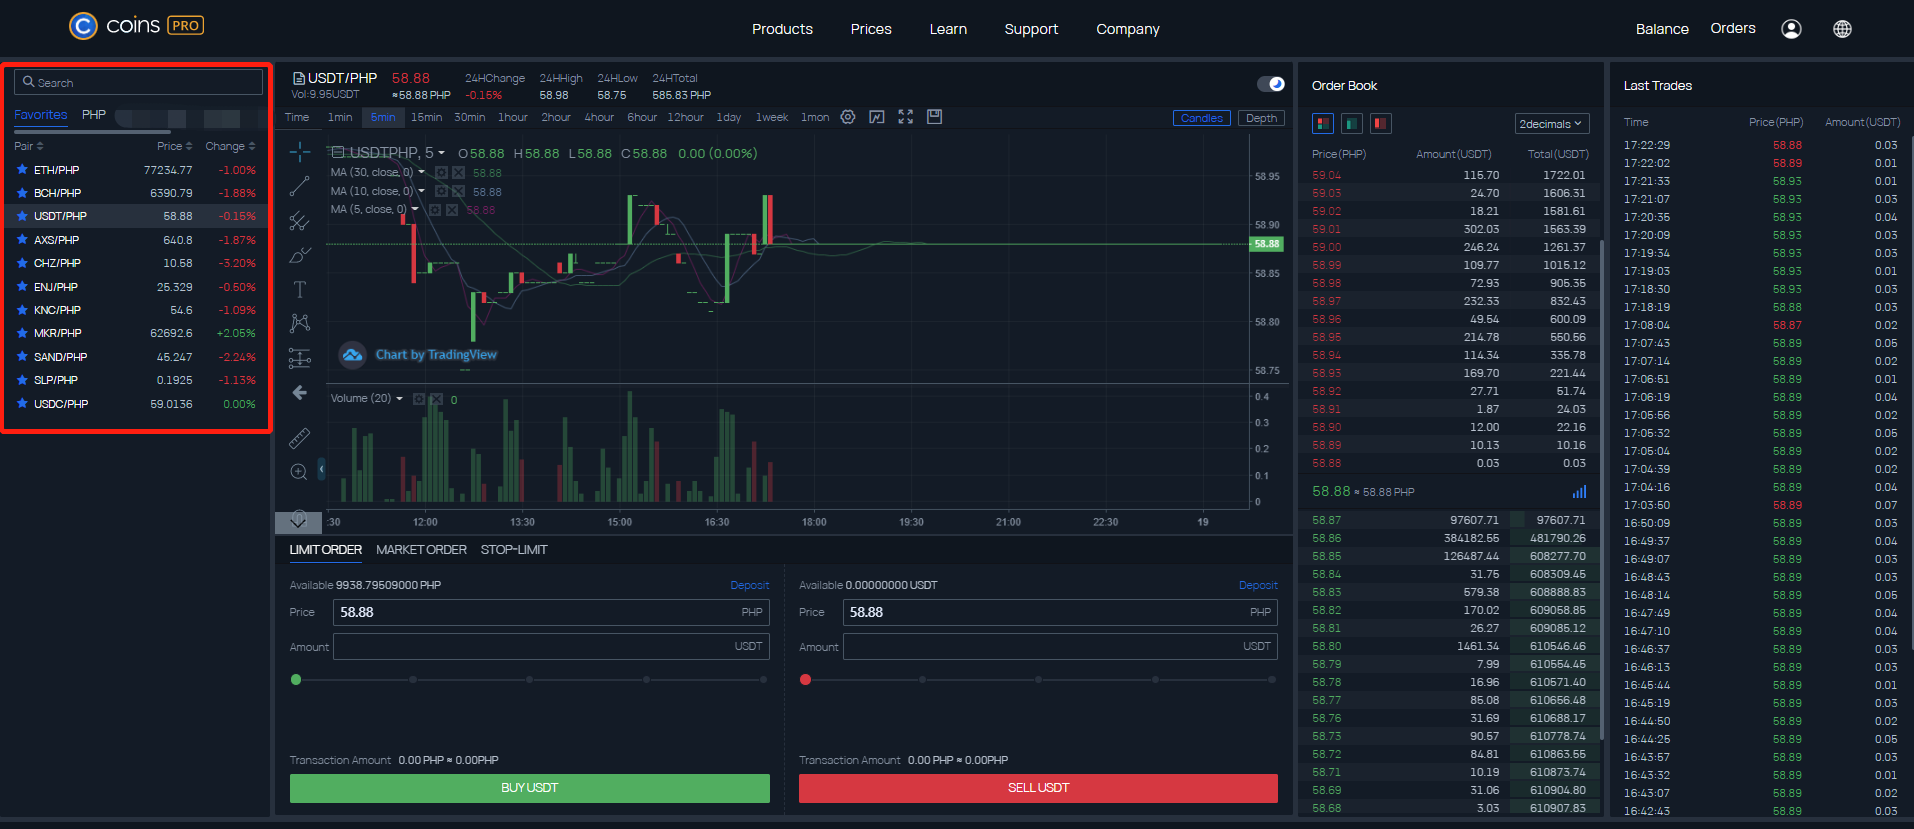 bitcoinlove.fun Offers Coins Trade Desk for High Net Worth Traders | BitPinas